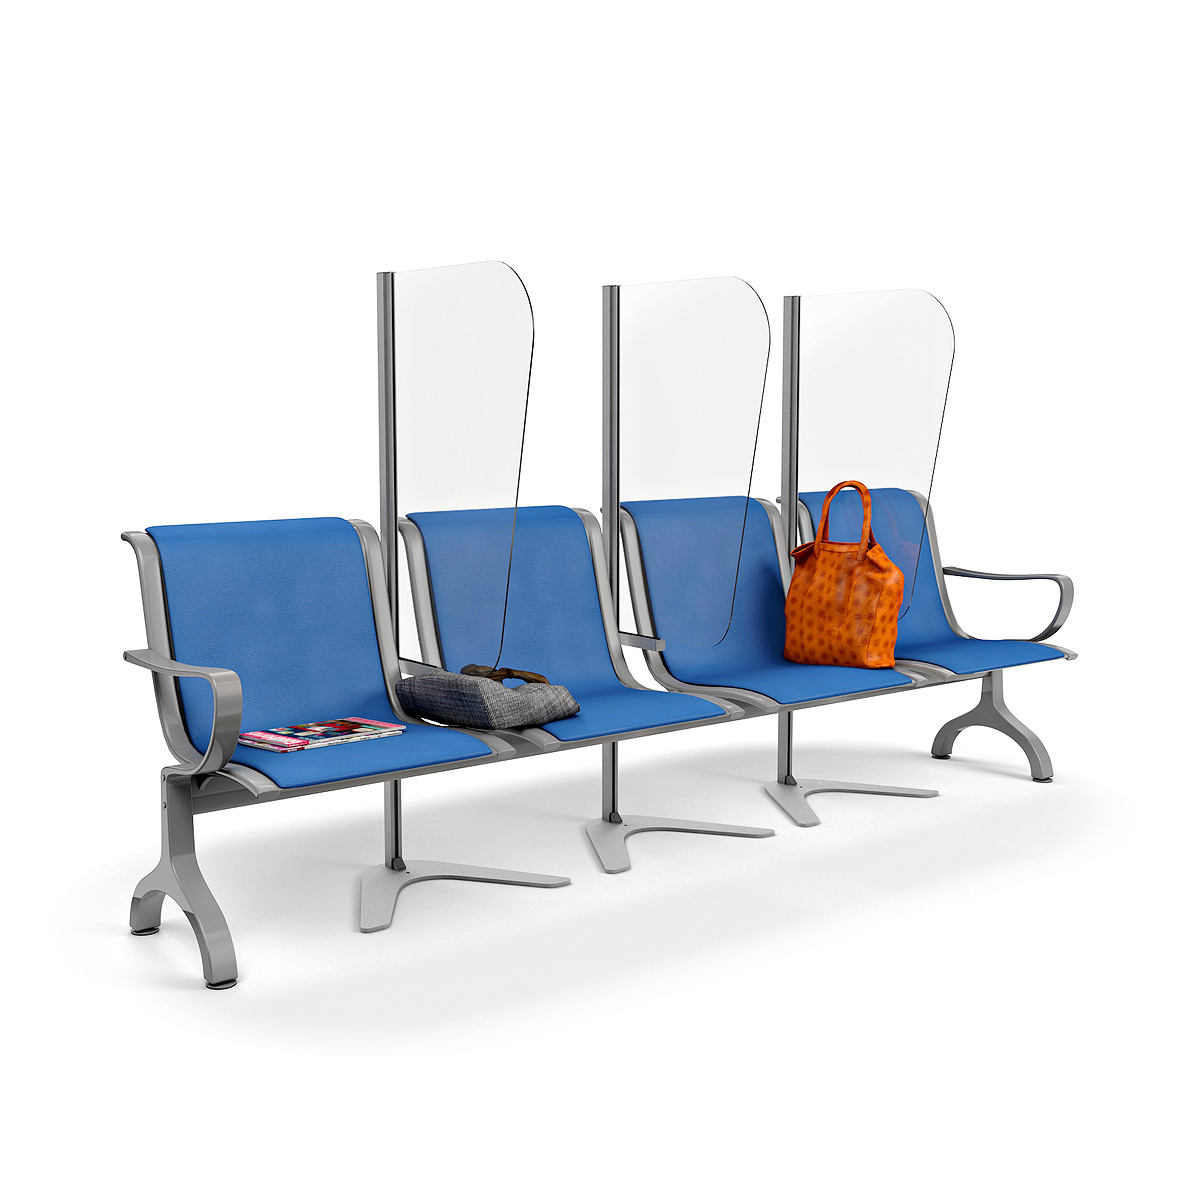 ACHOO® Patient Waiting Room Screen Divider For Bench Seating In Hospital Waiting Rooms And Doctor Surgeries